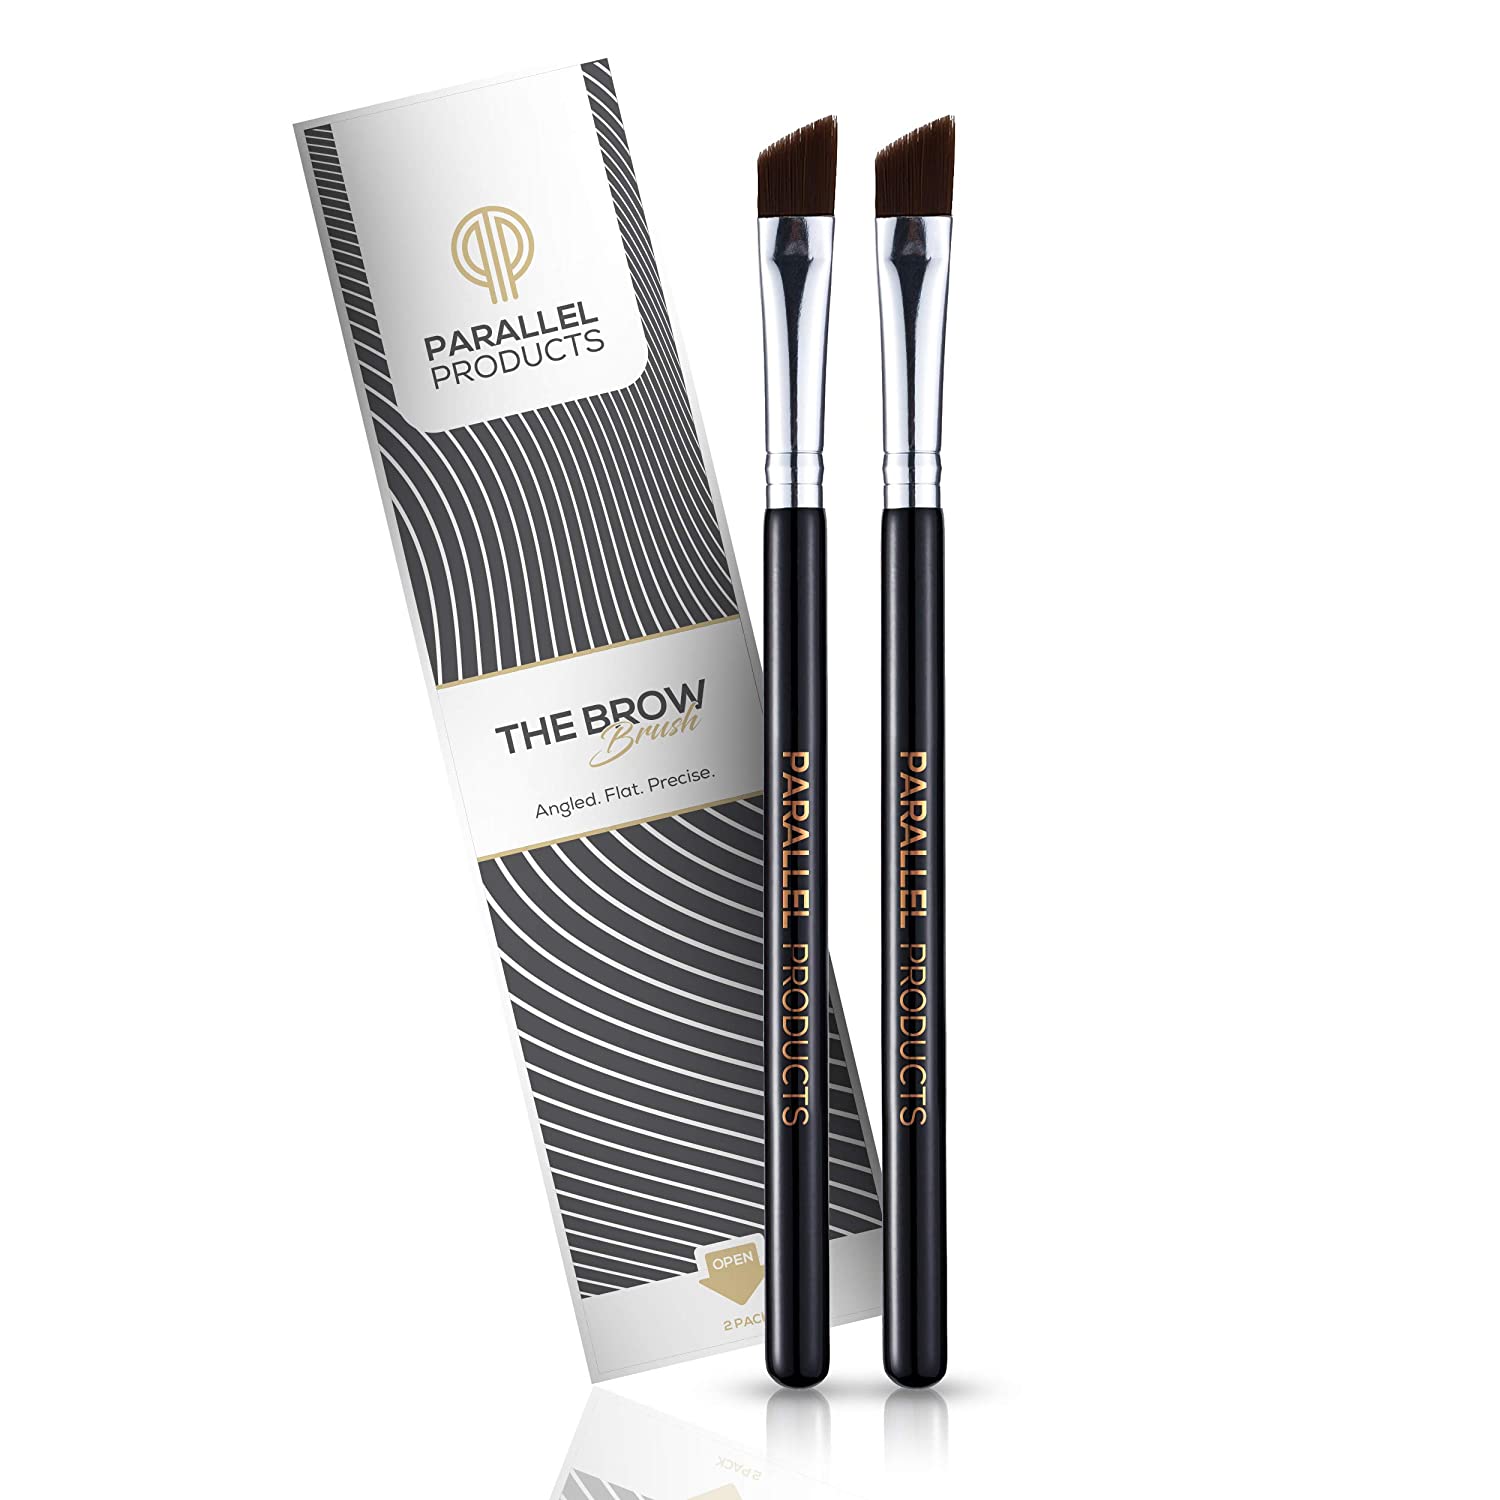 Parallel Products The Brow Brush Premium Angled Brow Brush Makeup Brush 2 Pack